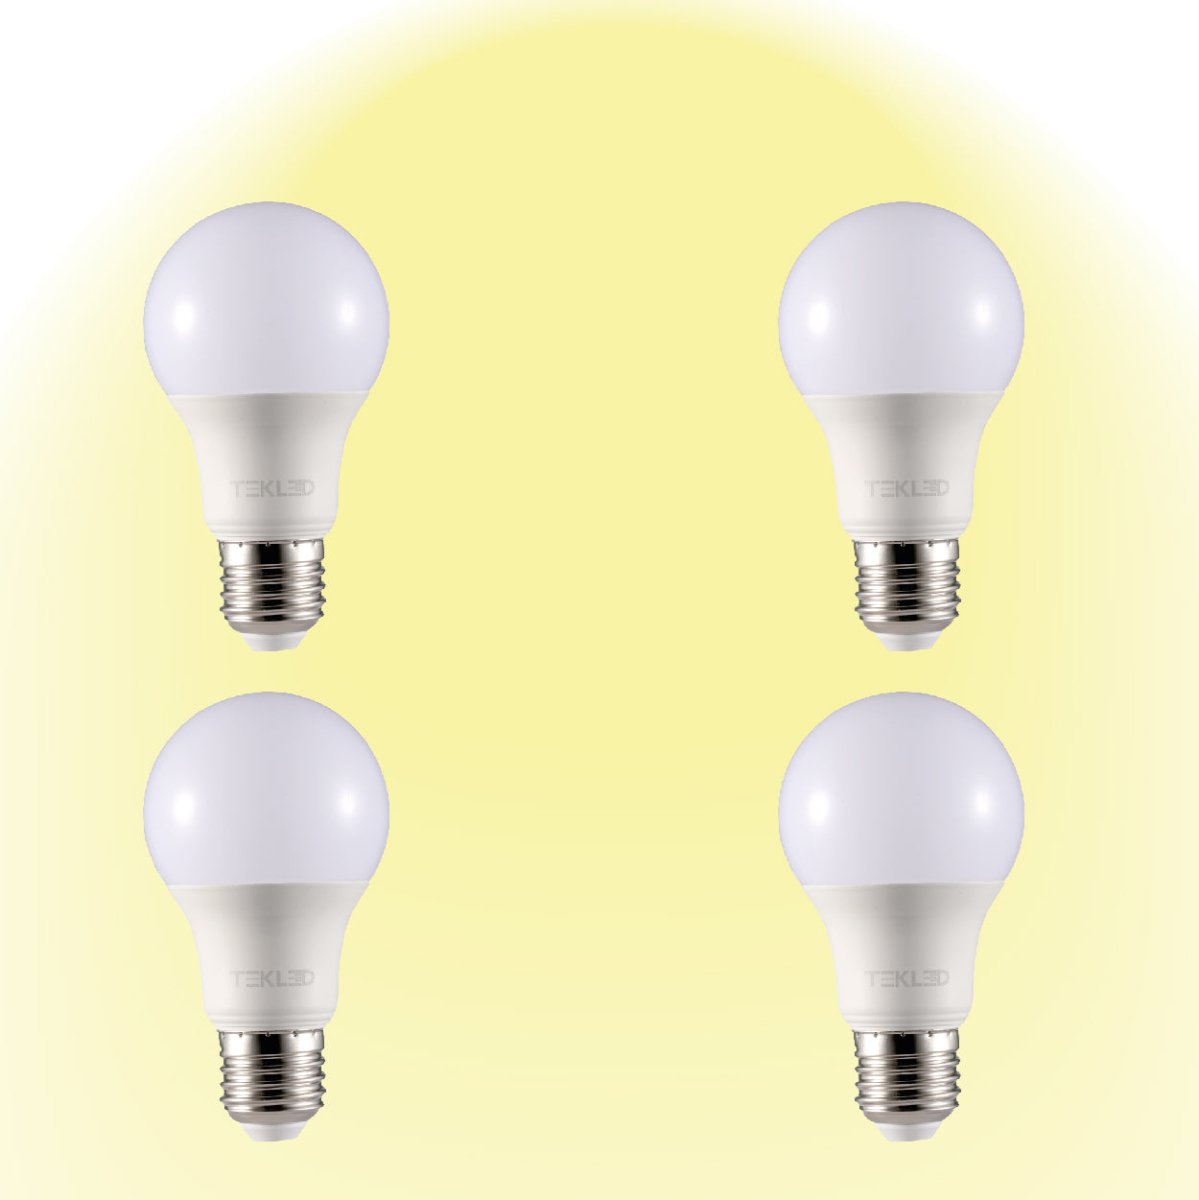 Virgo LED GLS Bulb A60 Dimmable E27 Edison Screw 2700K Warm White 7 W Pack of 4 527-156164